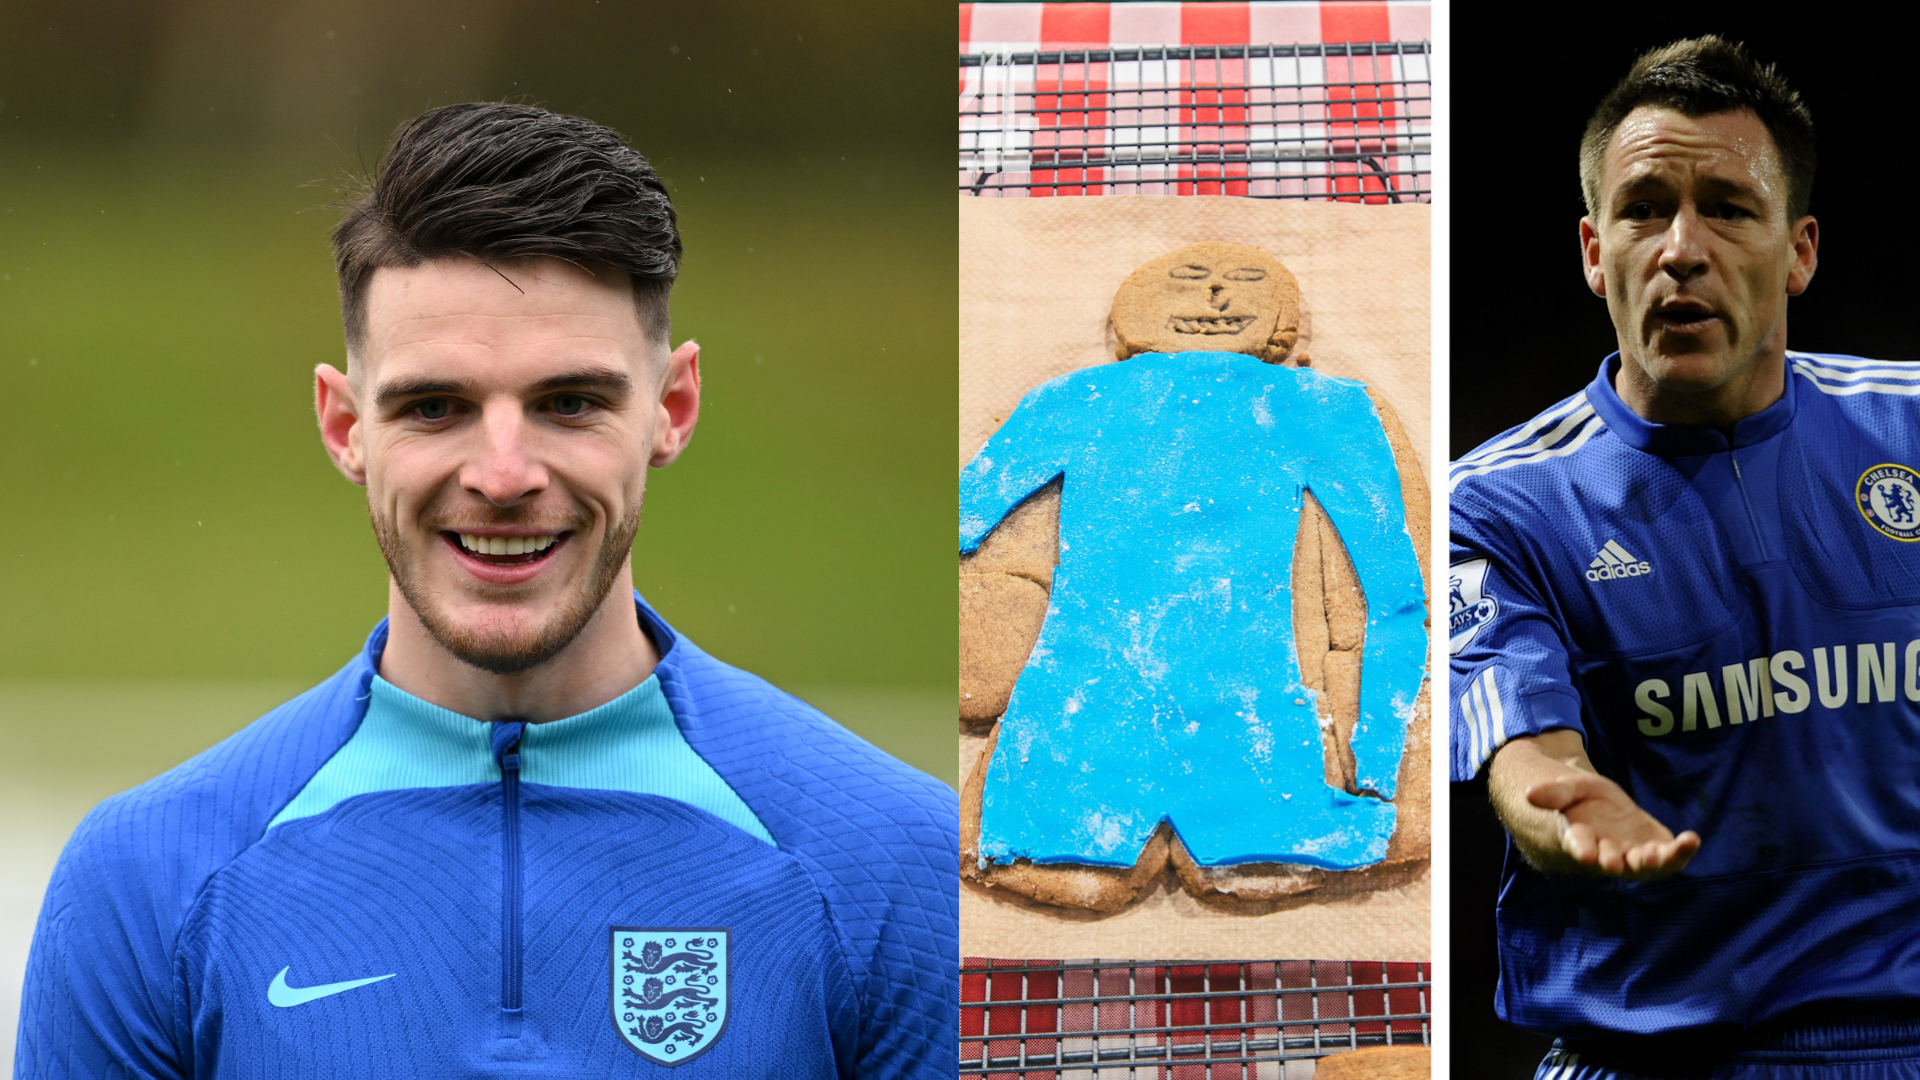 england-stars-should-stick-to-their-day-job-declan-rice-trent-alexander-arnold-and-kieran-trippier-fail-baking-challenge-miserably-as-they-aim-to-depict-likes-of-wayne-rooney-in-gingerbread-man-form-or-goal-com-india